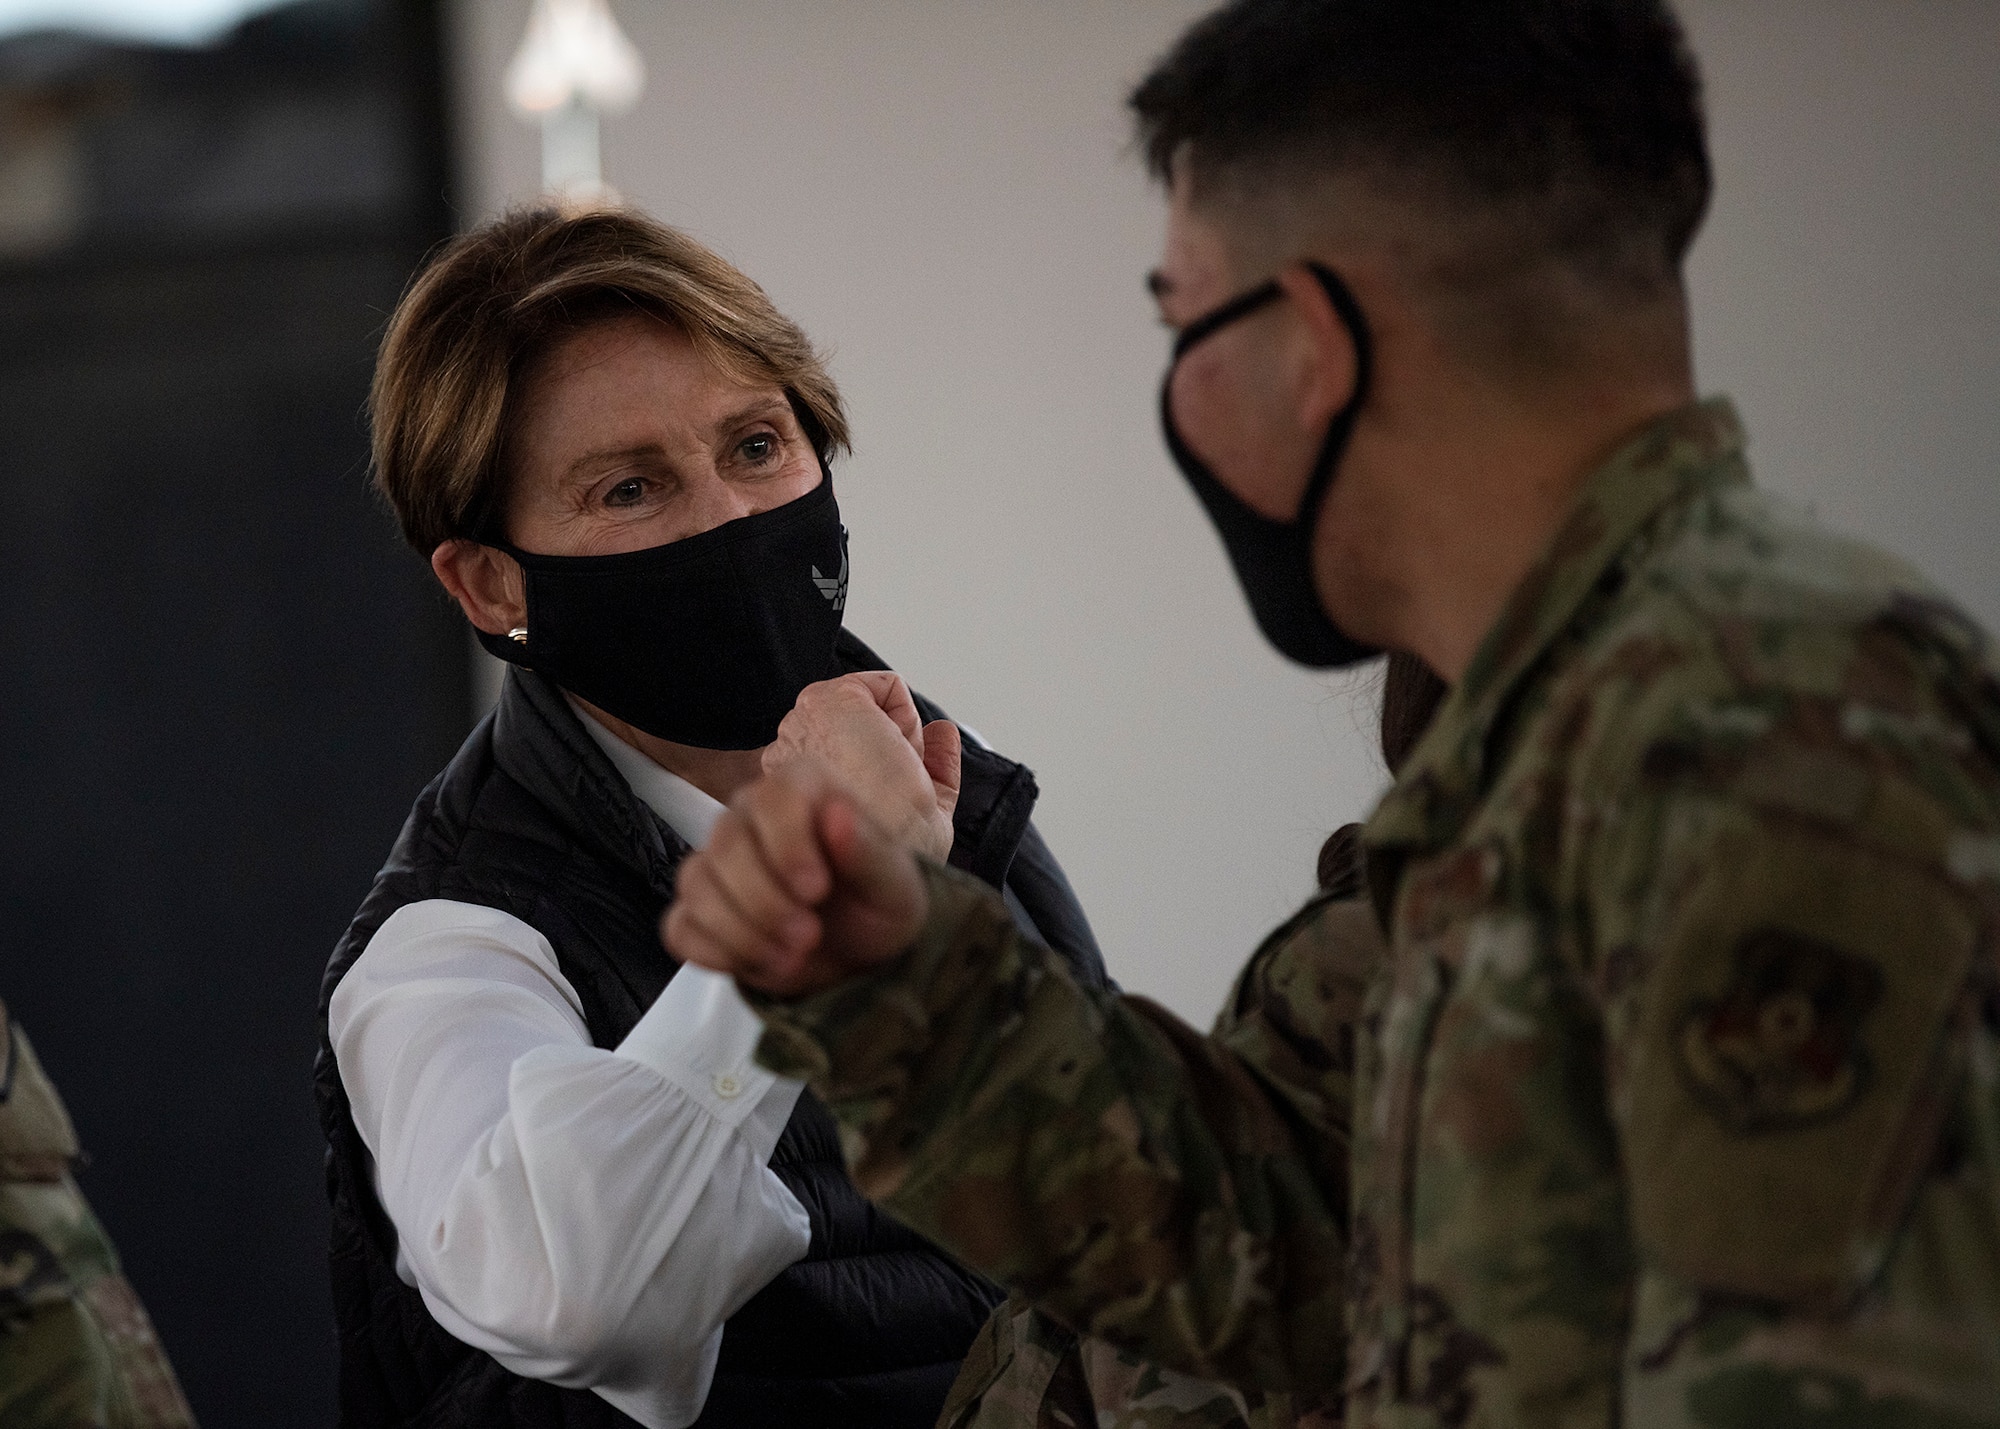 Secretary of the Air Force Barbara Barrett bumps elbows with an Airman assigned to the 380th Air Expeditionary Wing during a visit to Al Dhafra Air Base, United Arab Emirates, Dec. 21, 2020.